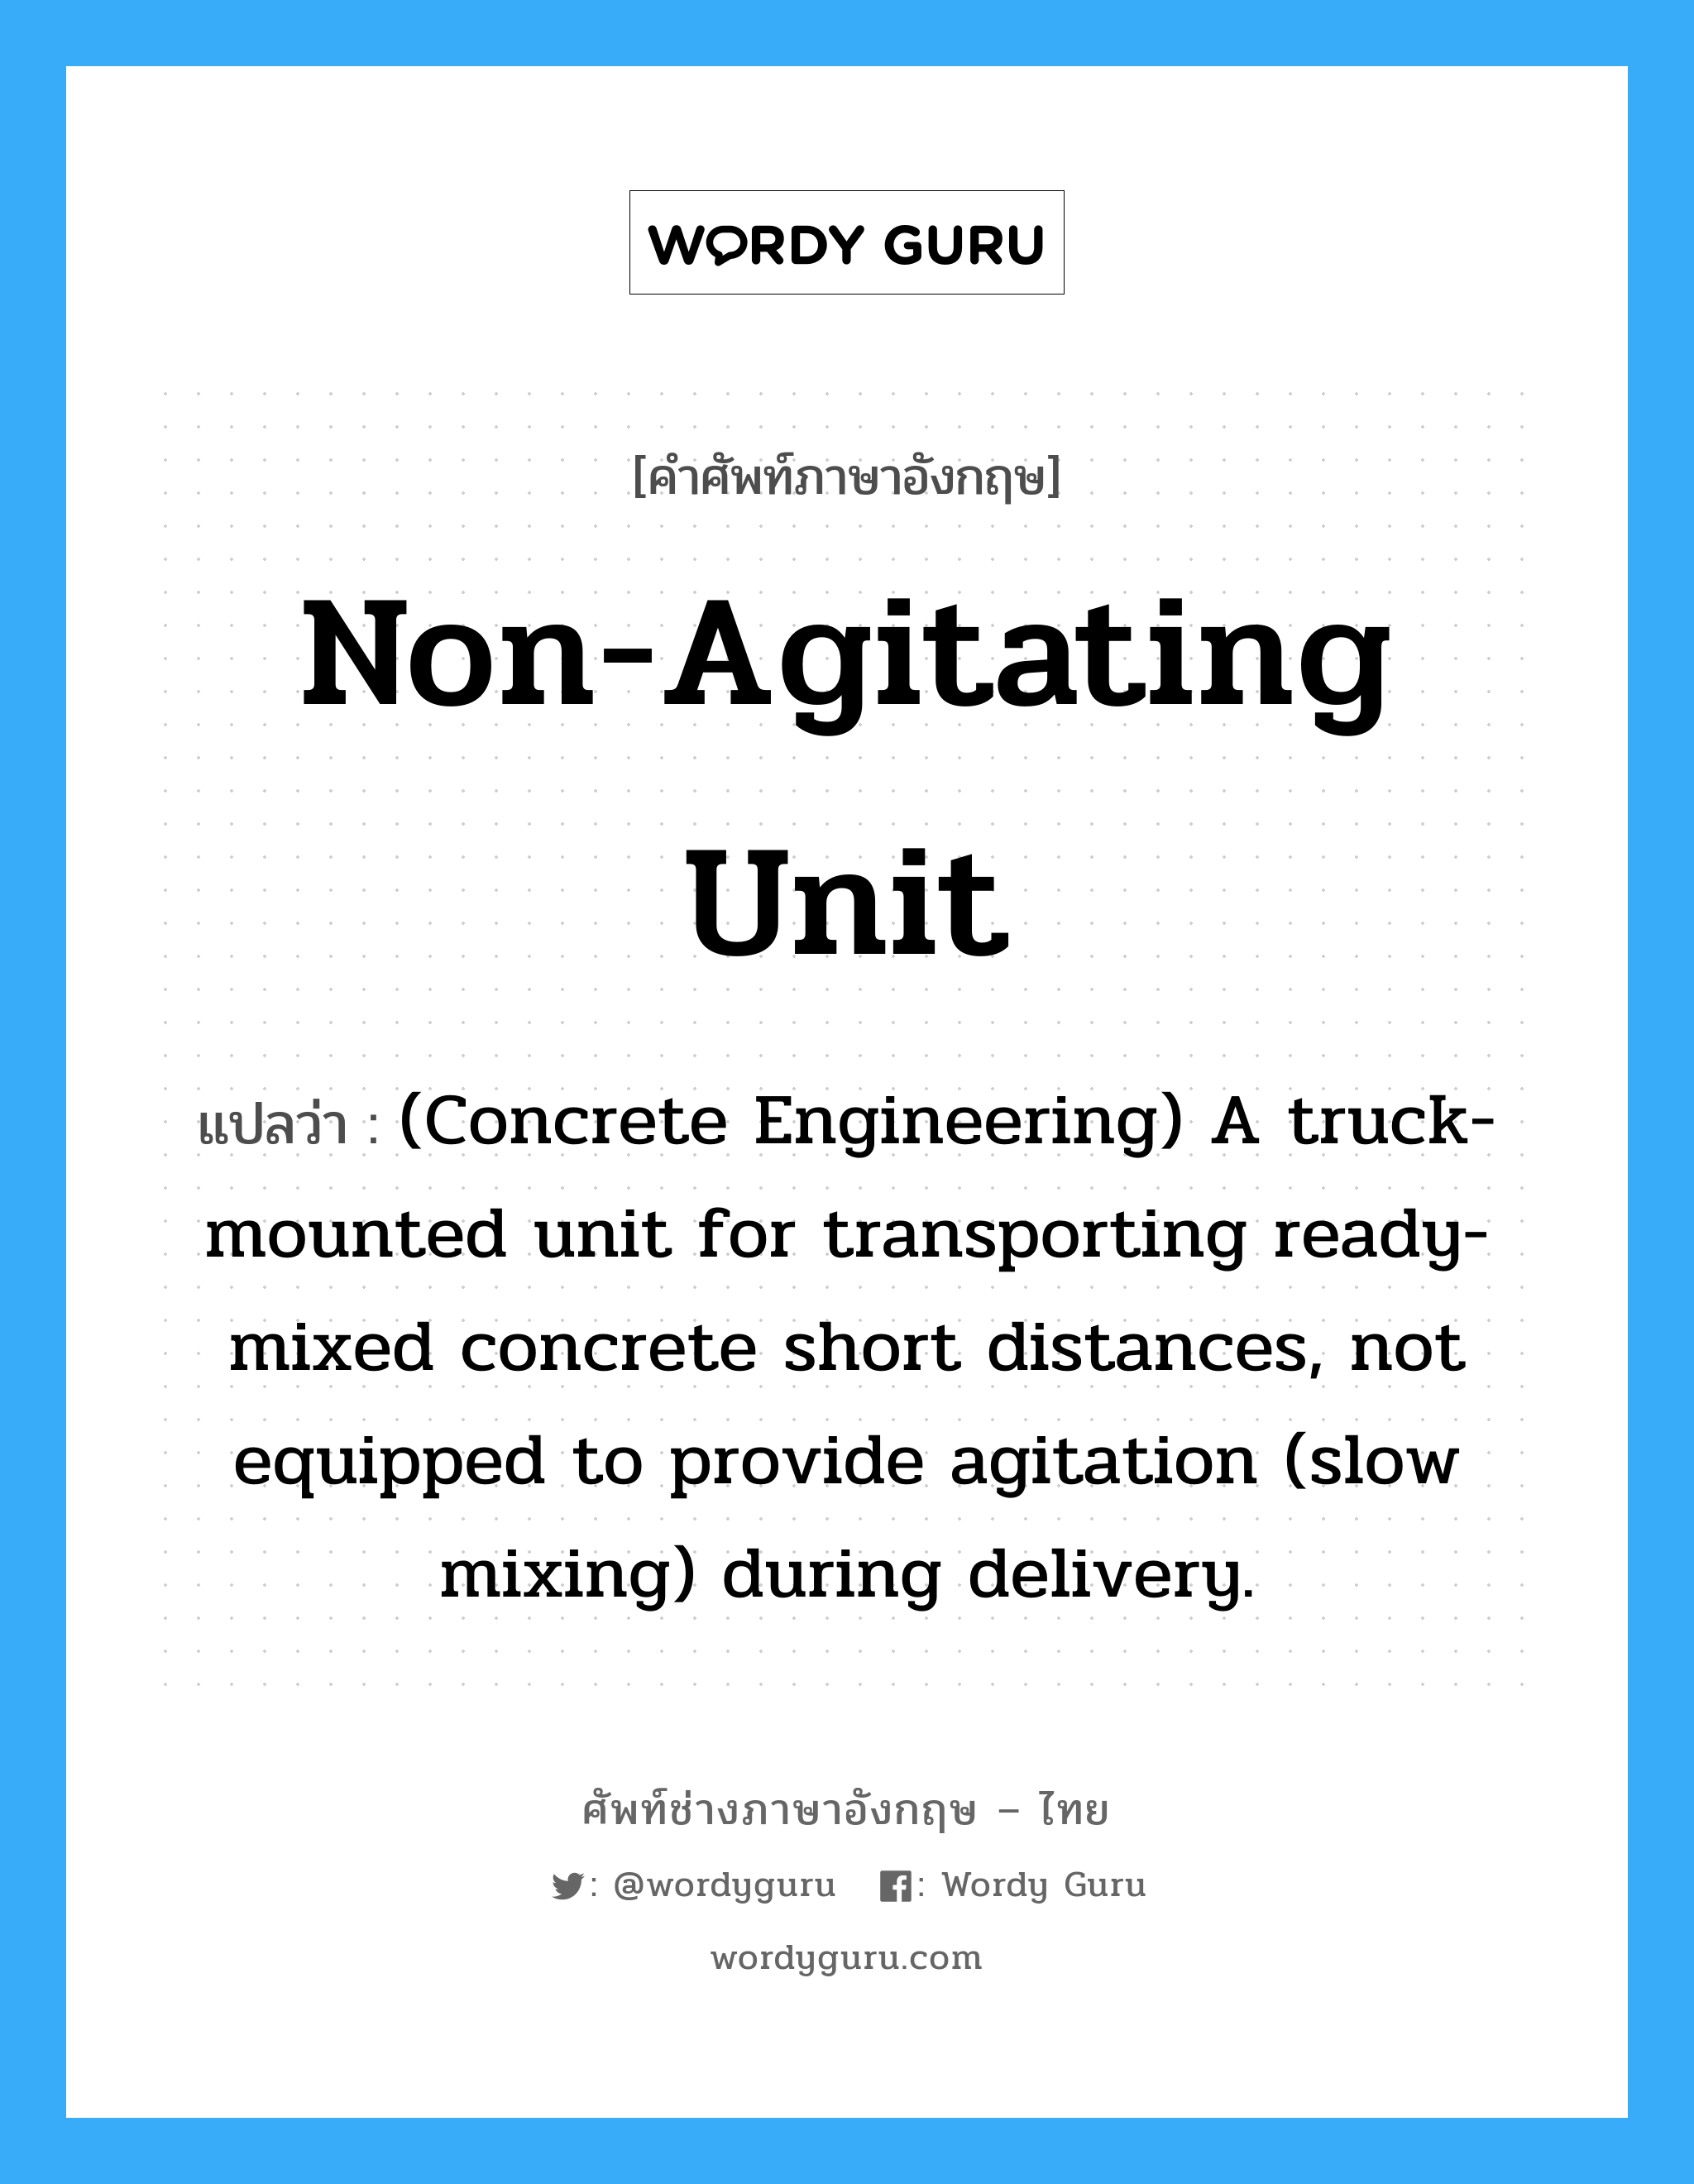 Non-agitating Unit แปลว่า?, คำศัพท์ช่างภาษาอังกฤษ - ไทย Non-agitating Unit คำศัพท์ภาษาอังกฤษ Non-agitating Unit แปลว่า (Concrete Engineering) A truck-mounted unit for transporting ready-mixed concrete short distances, not equipped to provide agitation (slow mixing) during delivery.